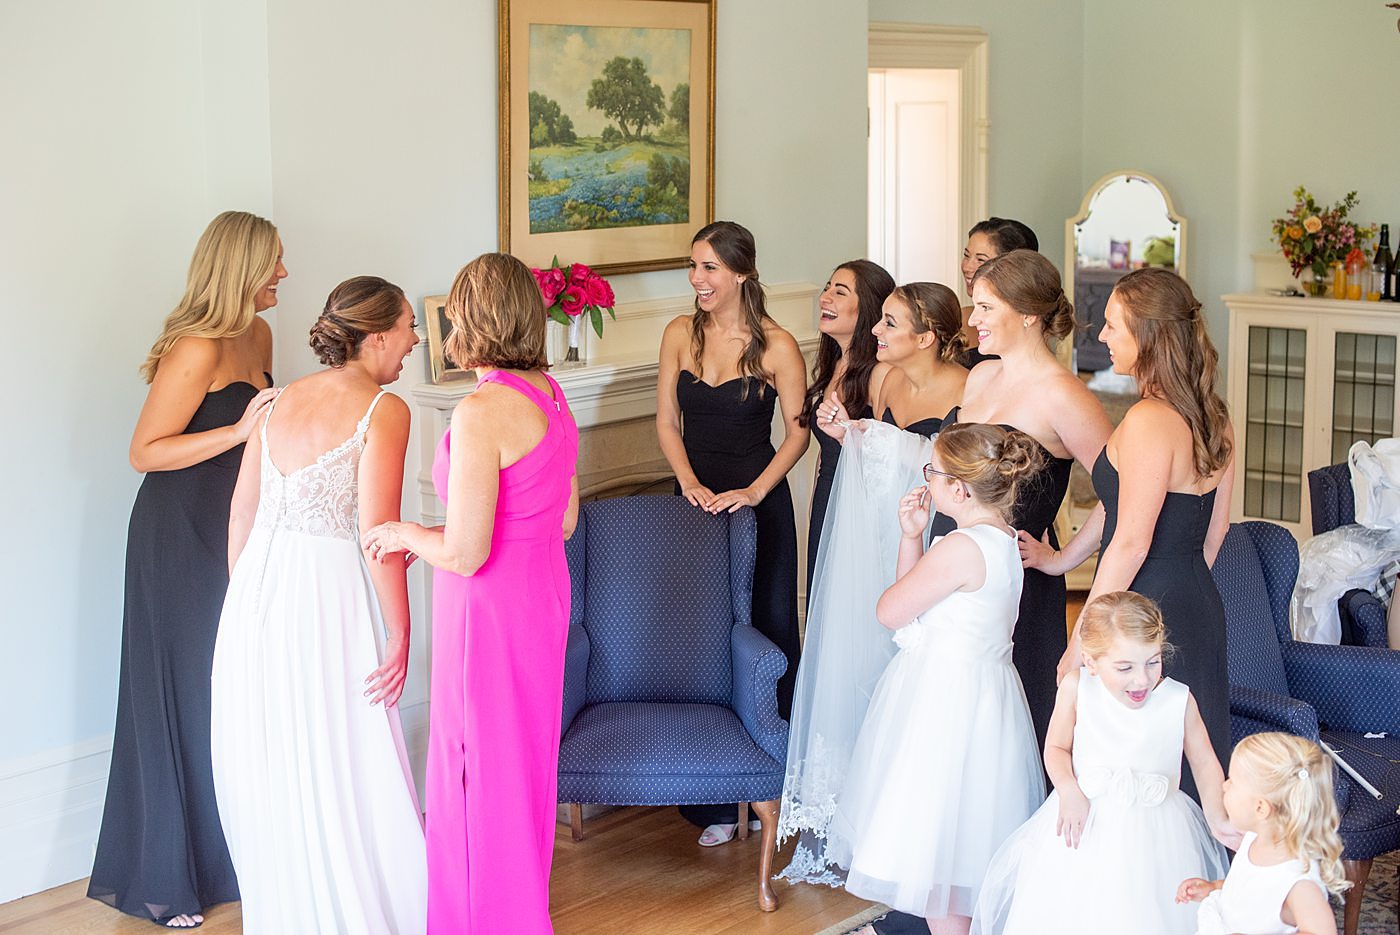 Photos by Mikkel Paige Photography at Waveny House wedding venue in New Canaan, Connecticut. This beautiful venue has an outdoor garden for the ceremony and indoor historic home for the reception. The bride got ready in the main house with her mother and bridesmaids. #mikkelpaige #wavenyhouse #wavenyhousewedding #connecticutweddingvenue #connecticutweddingphotographer #gettingready